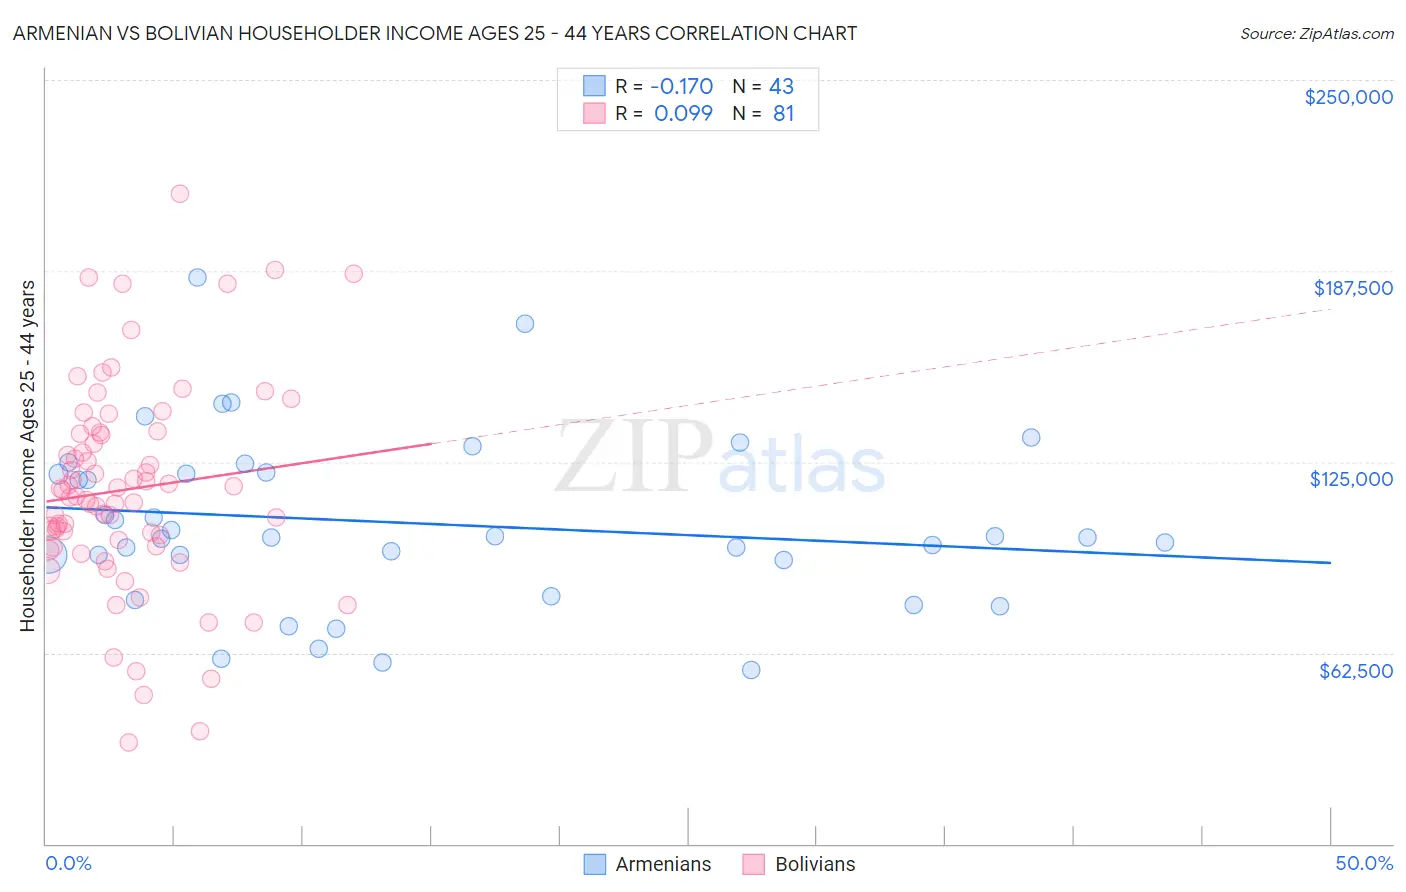 Armenian vs Bolivian Householder Income Ages 25 - 44 years